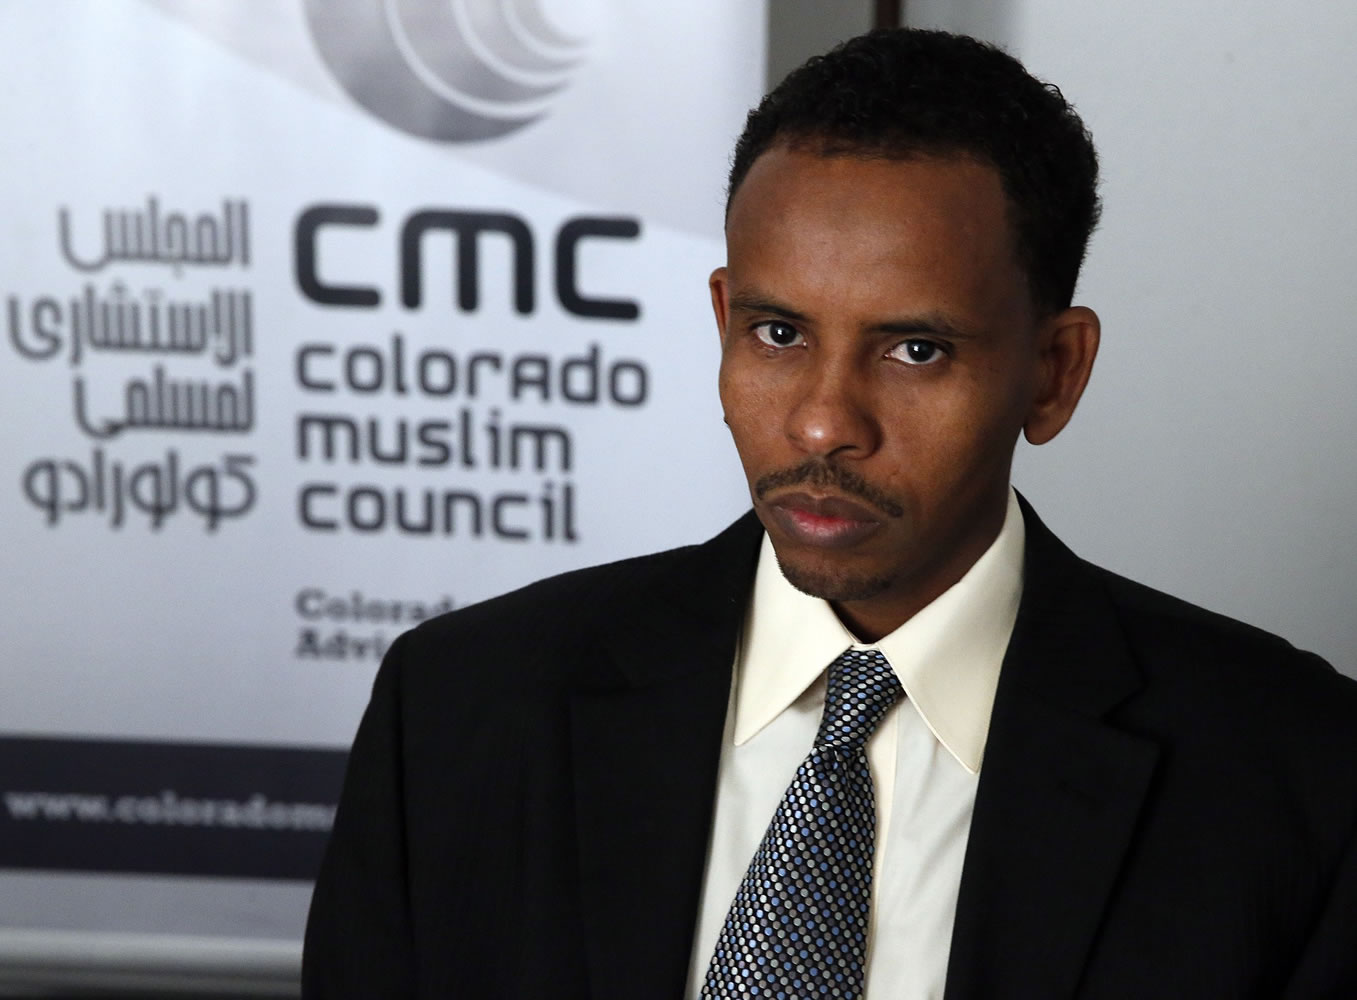 Somali-American Ahmed Odowaay, who works as a community advocate and professional translator, is pictured inside an office used by the Colorado Muslim Council, in Aurora, Colo., on Wednesday.